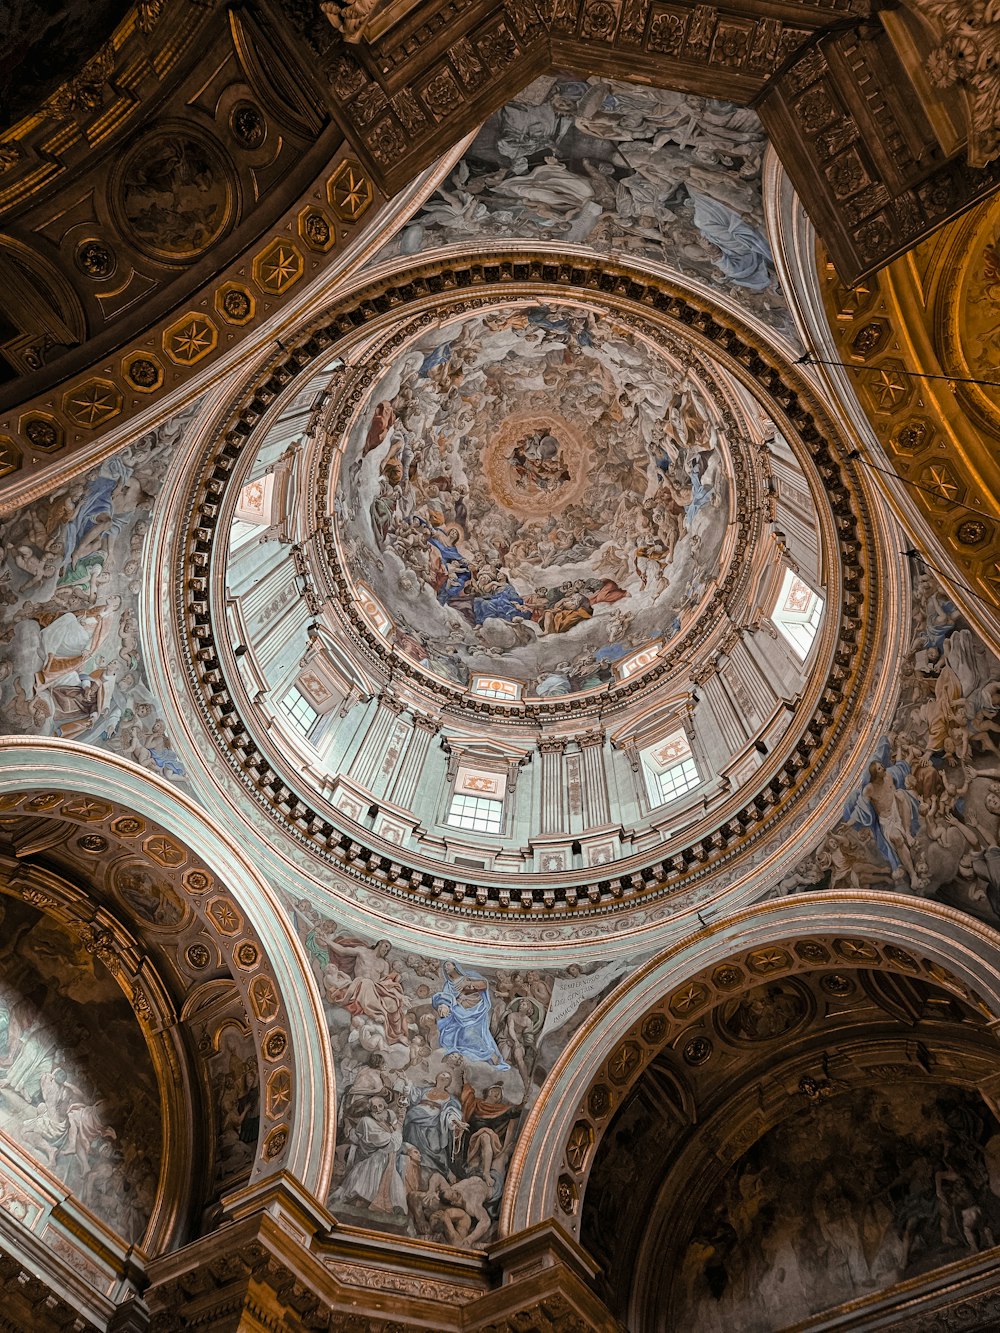 the ceiling of a building with a circular painting on it